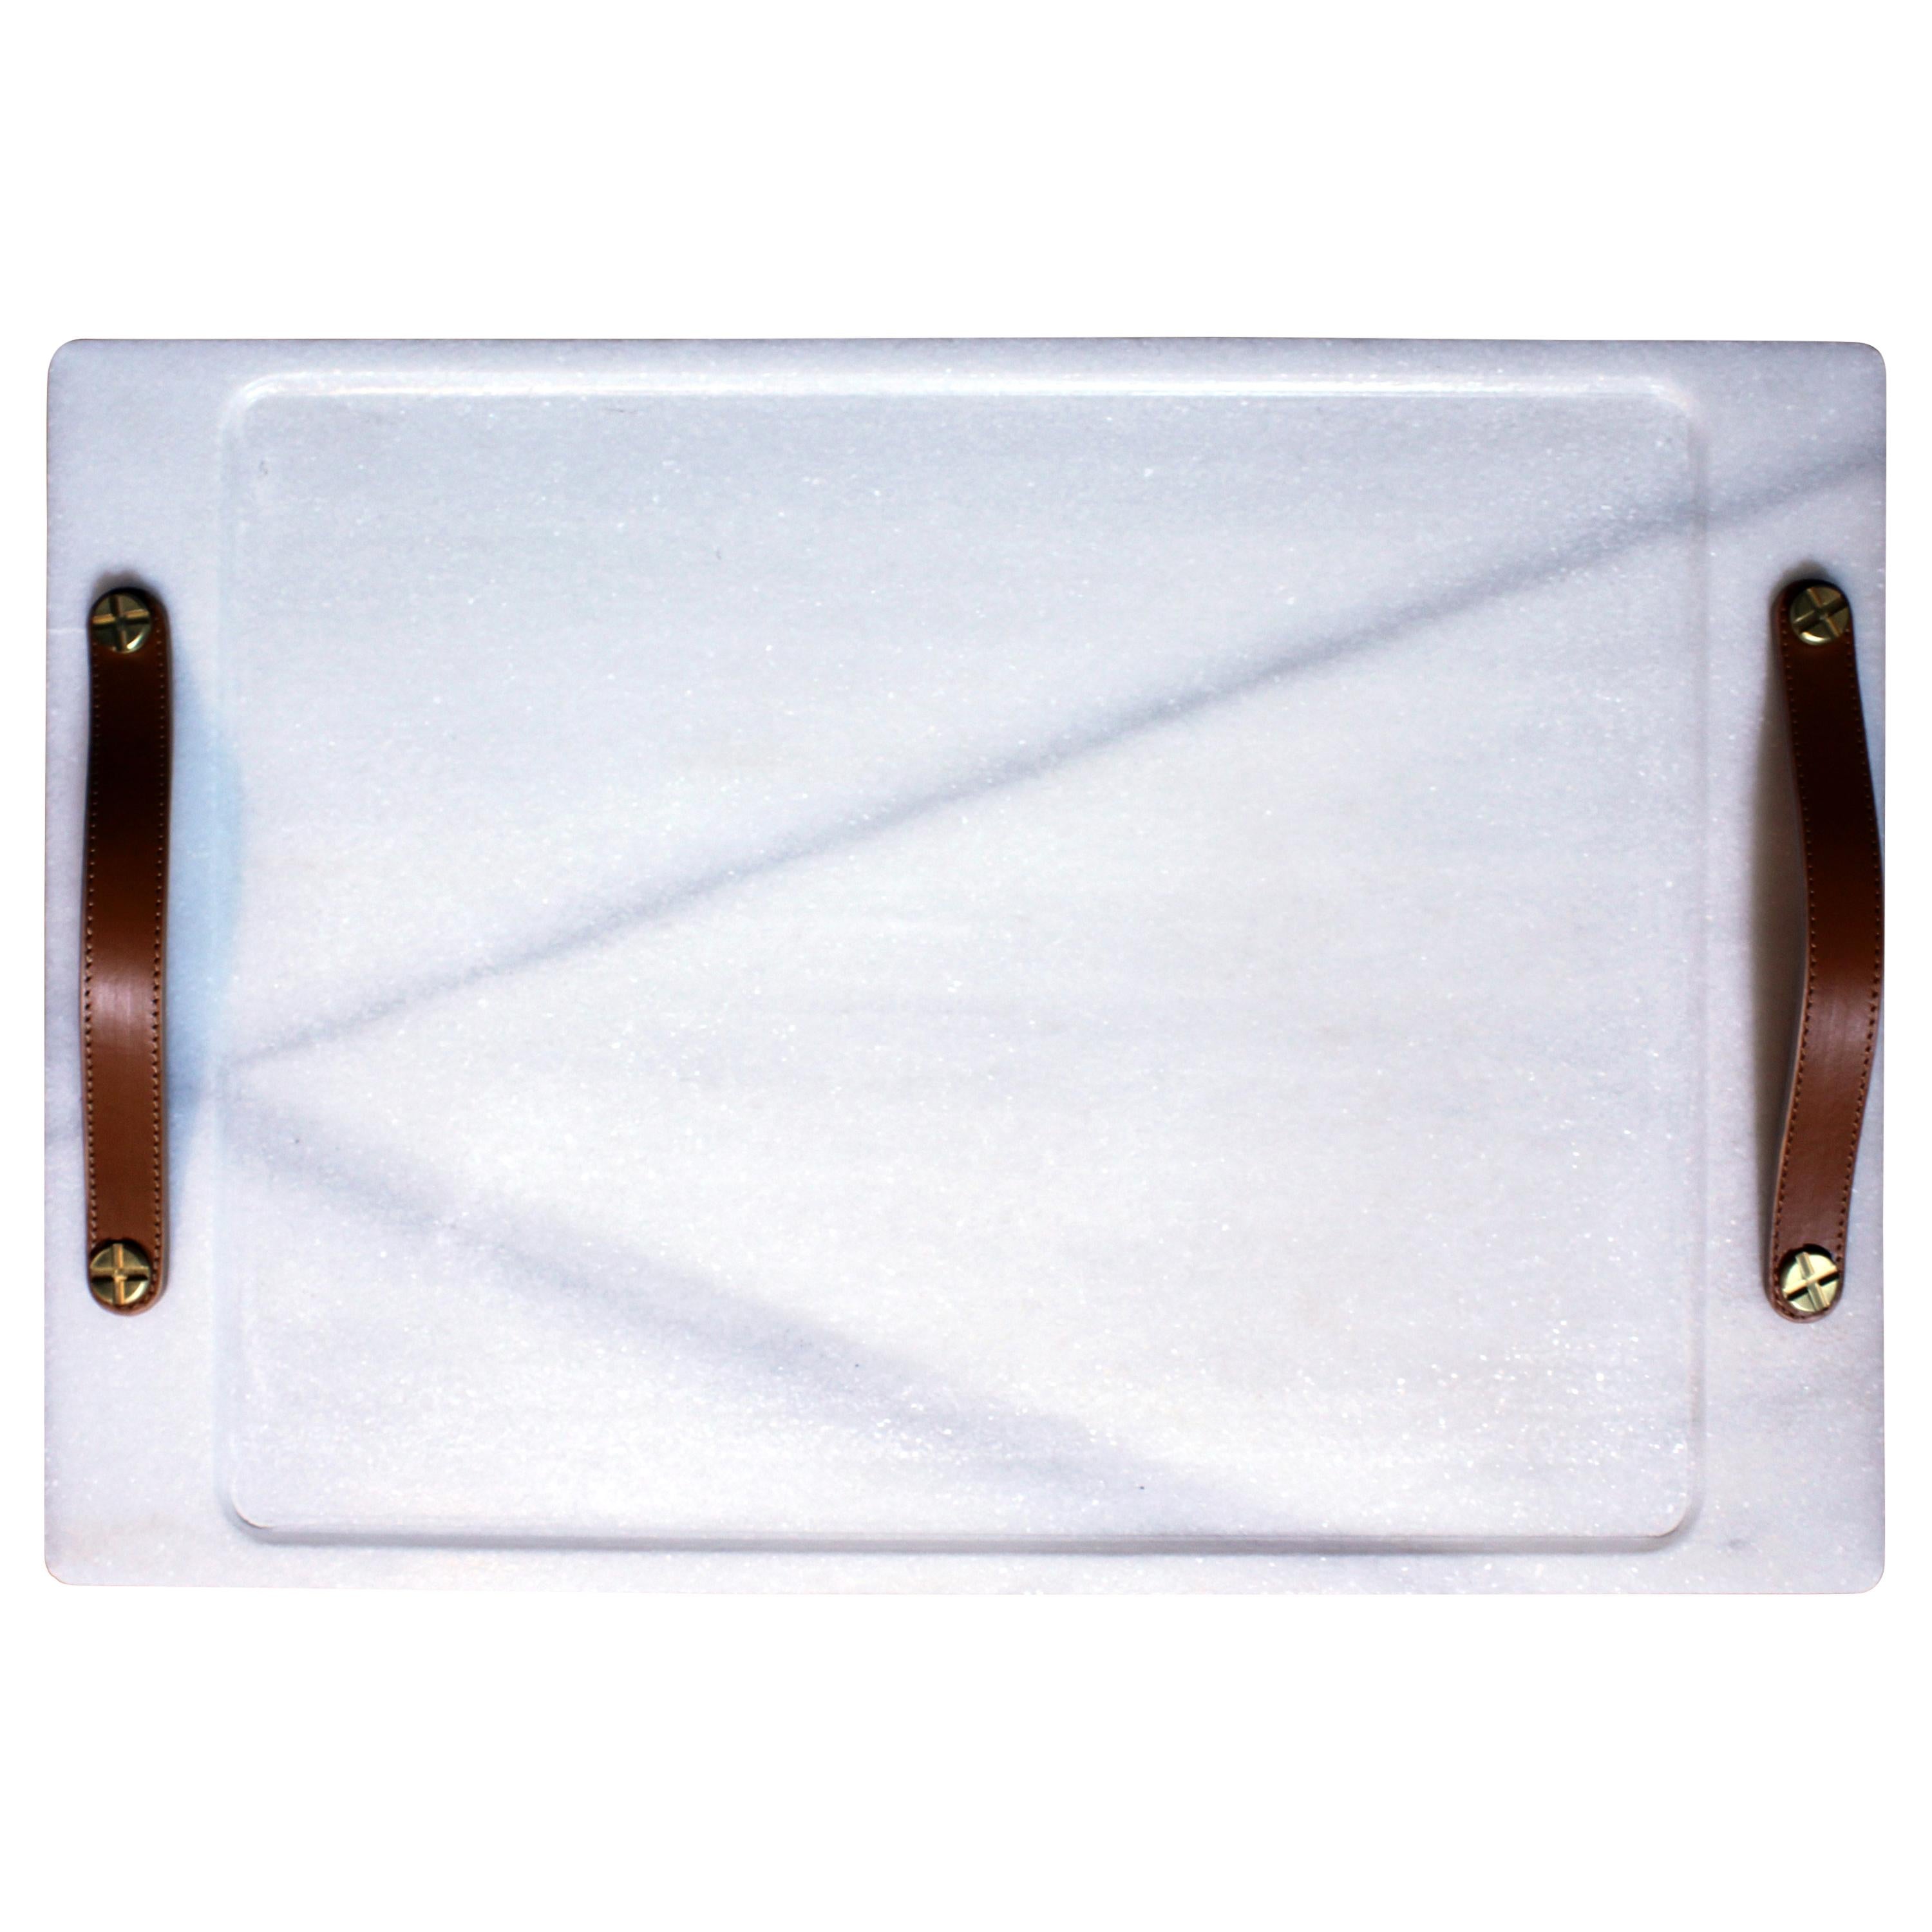 Marble Tray, Macael Tone with Leather Straps, Large